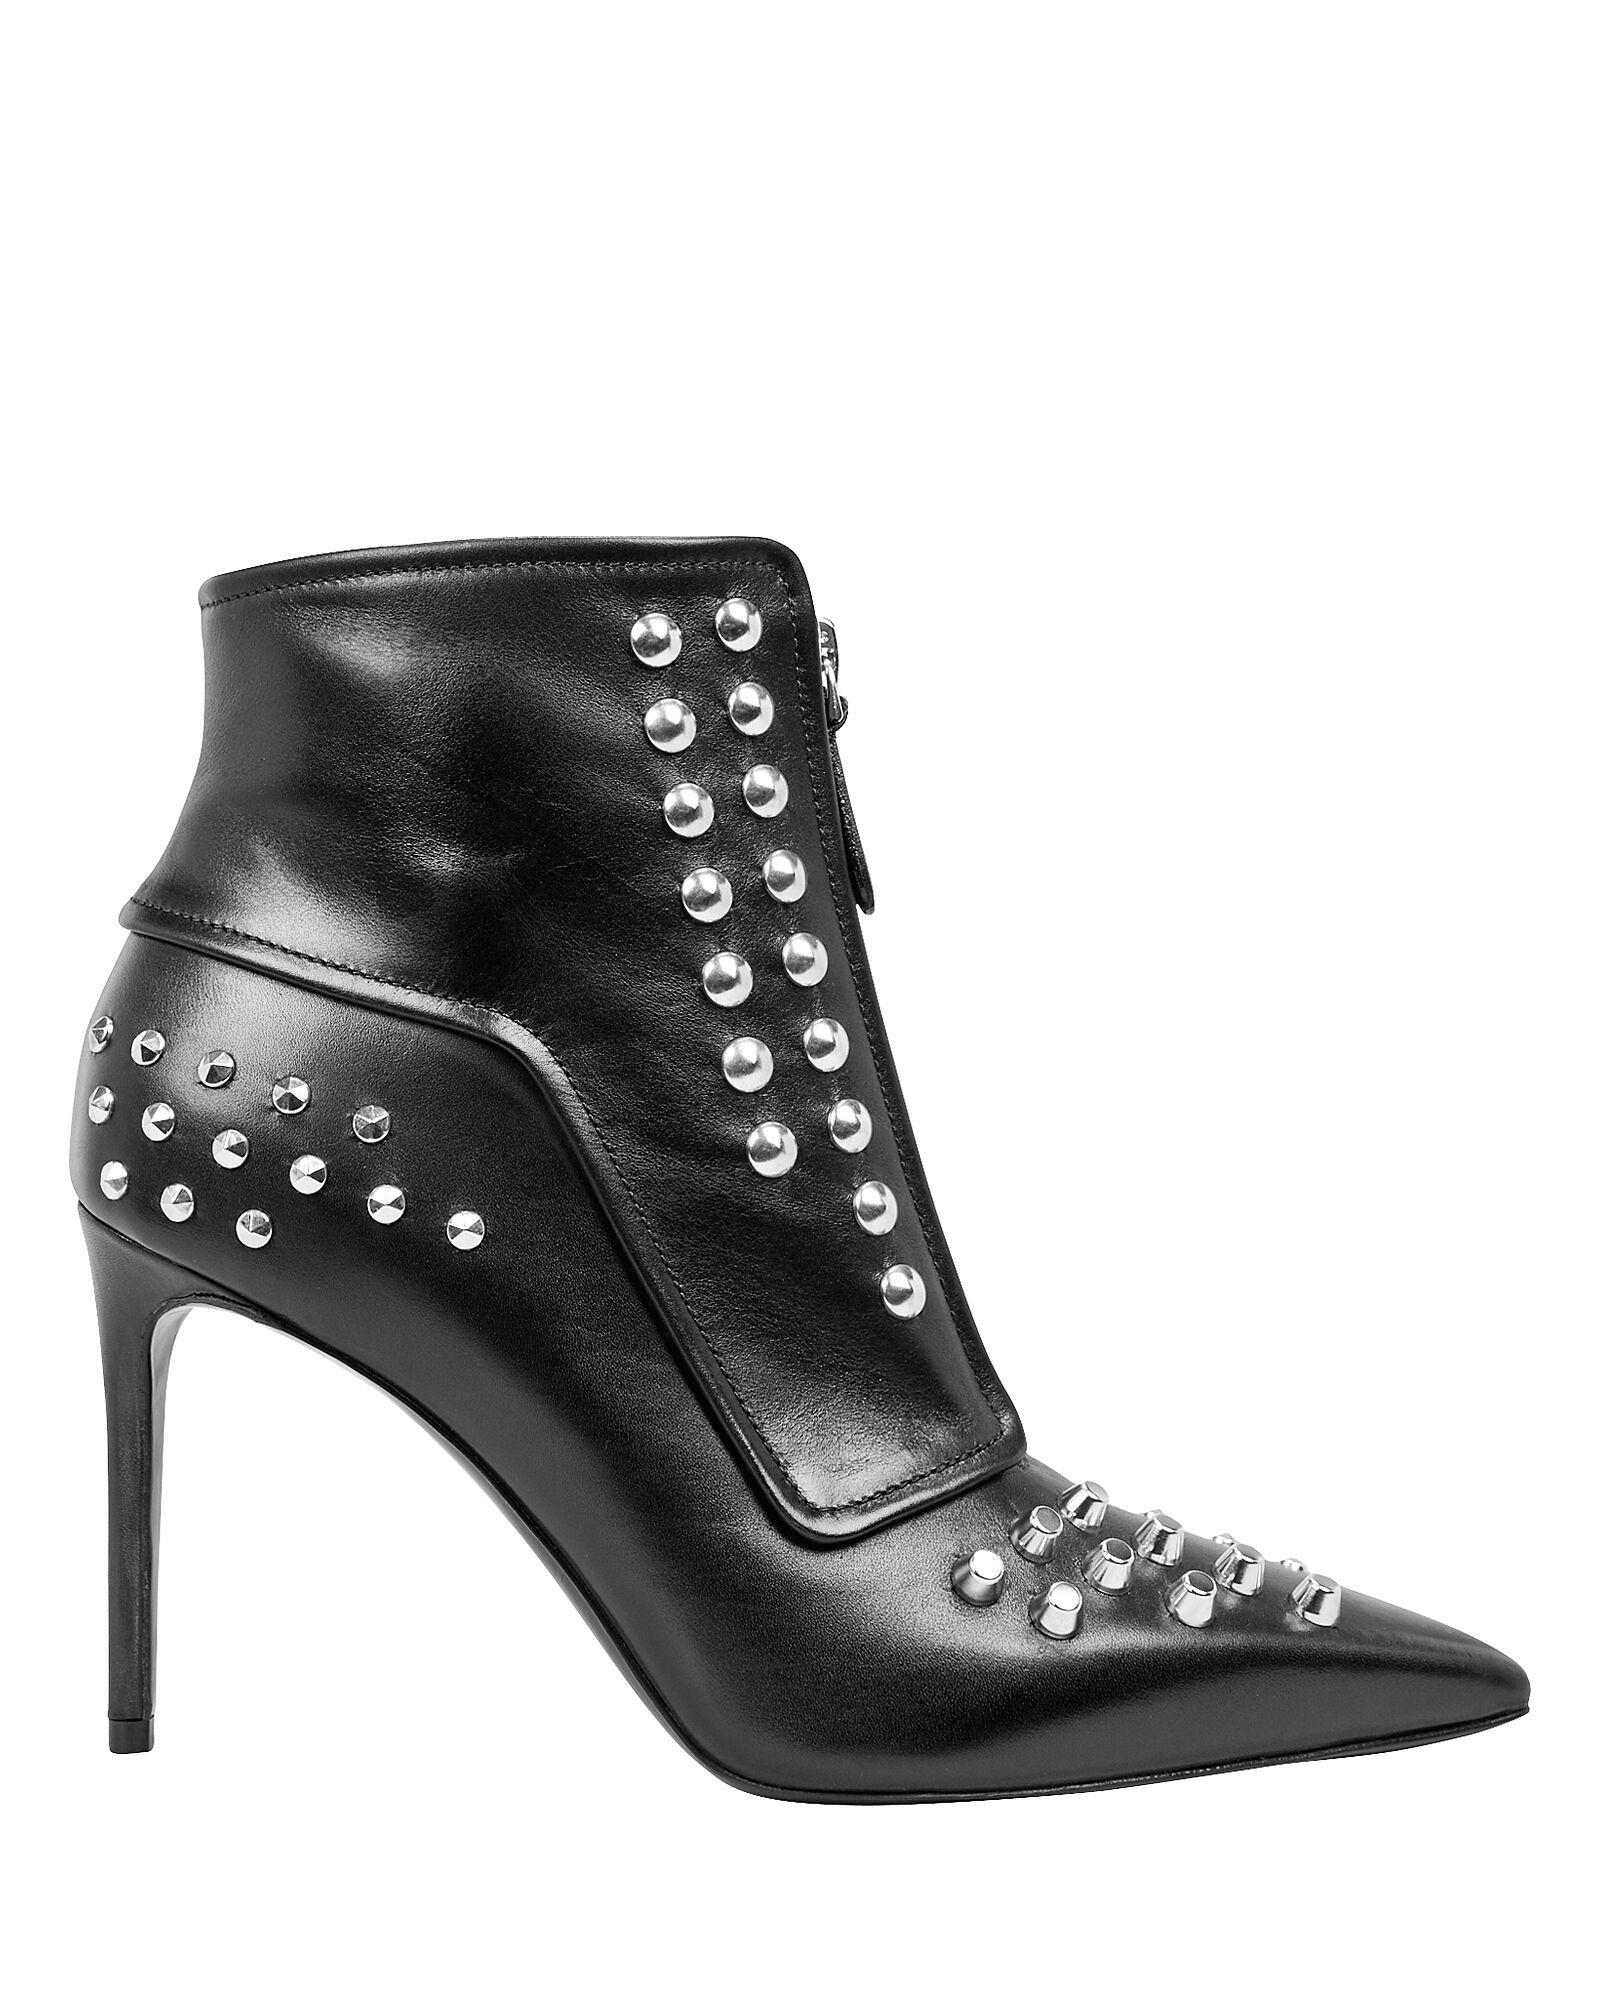 Alexander McQueen Studded Leather Ankle Boots, 